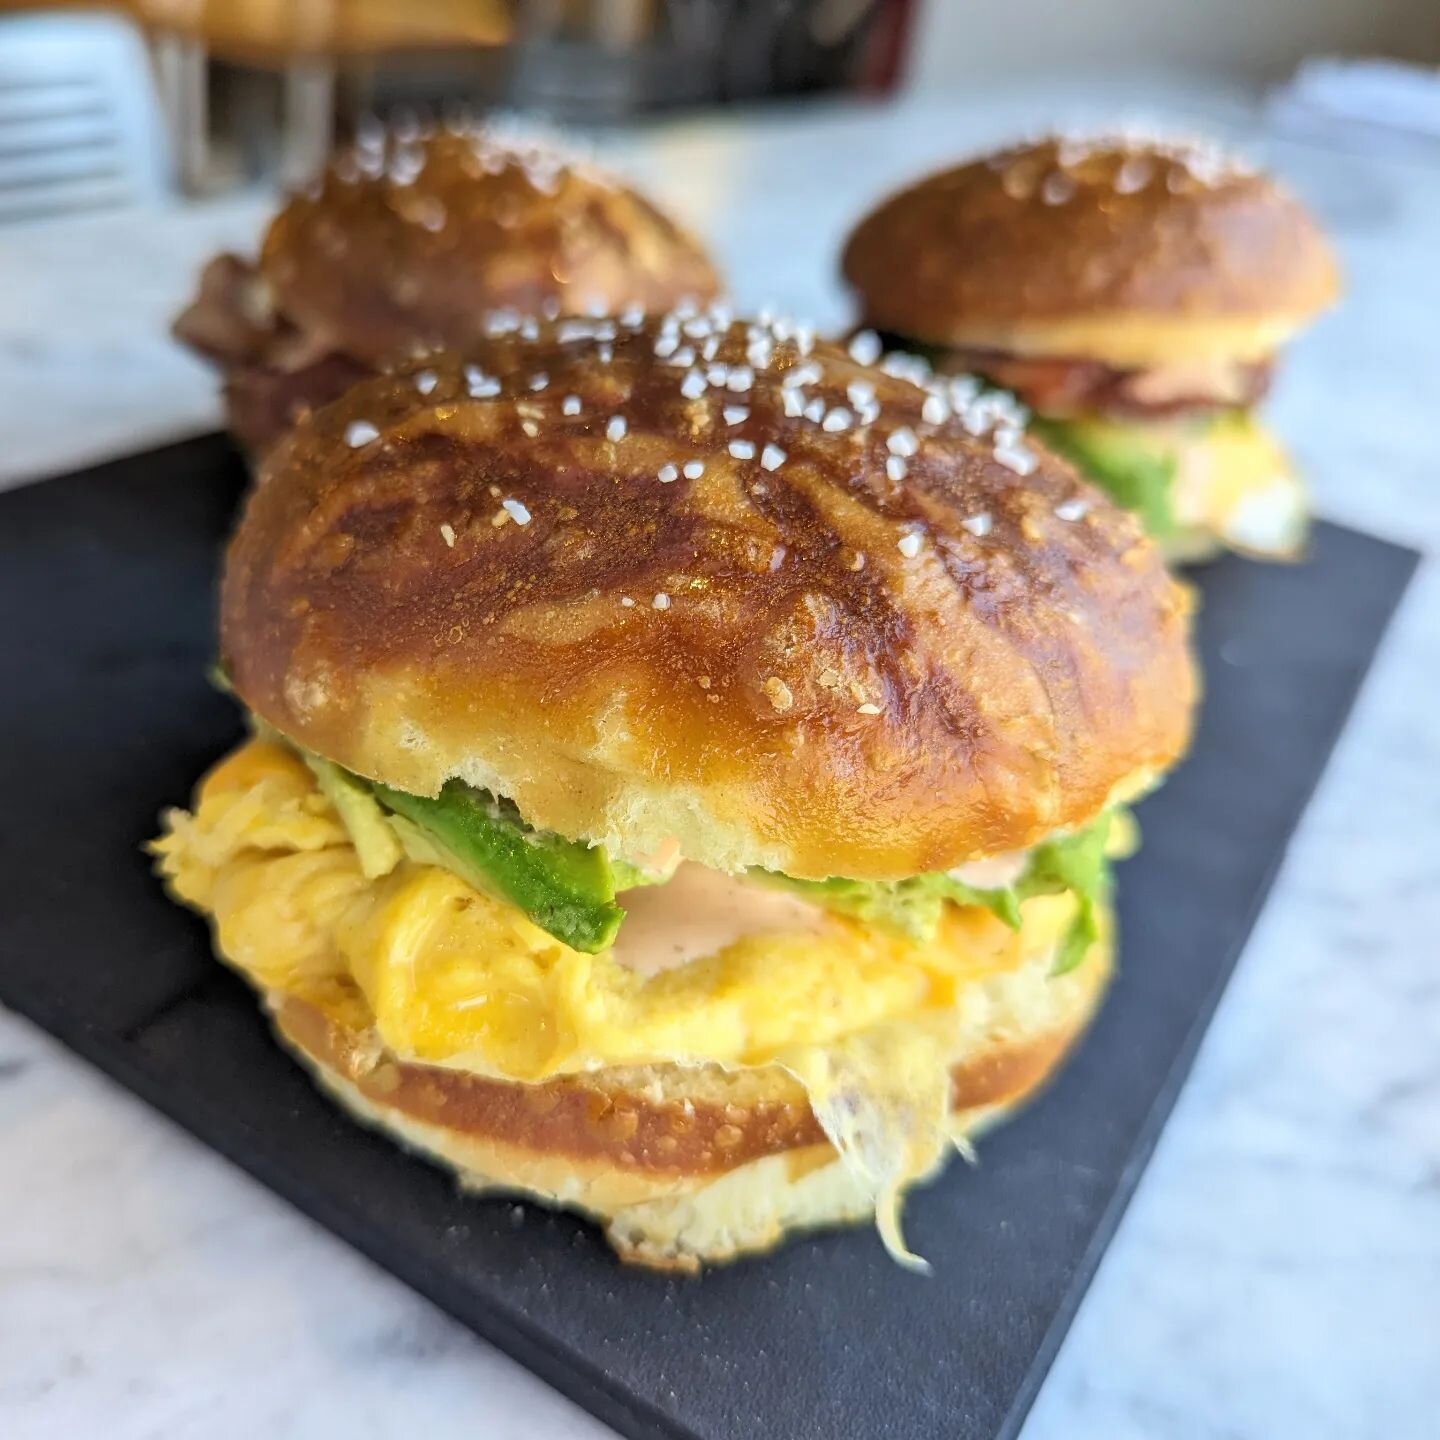 Pretzel bun breakfast sandwiches and live music by Ginny Shilliday tomorrow, Sunday, 4/7!

For those of you who can't make it to @breweryoutre to grab one of our pretzels (they're available today too!), we decided to make some buns out of spare dough